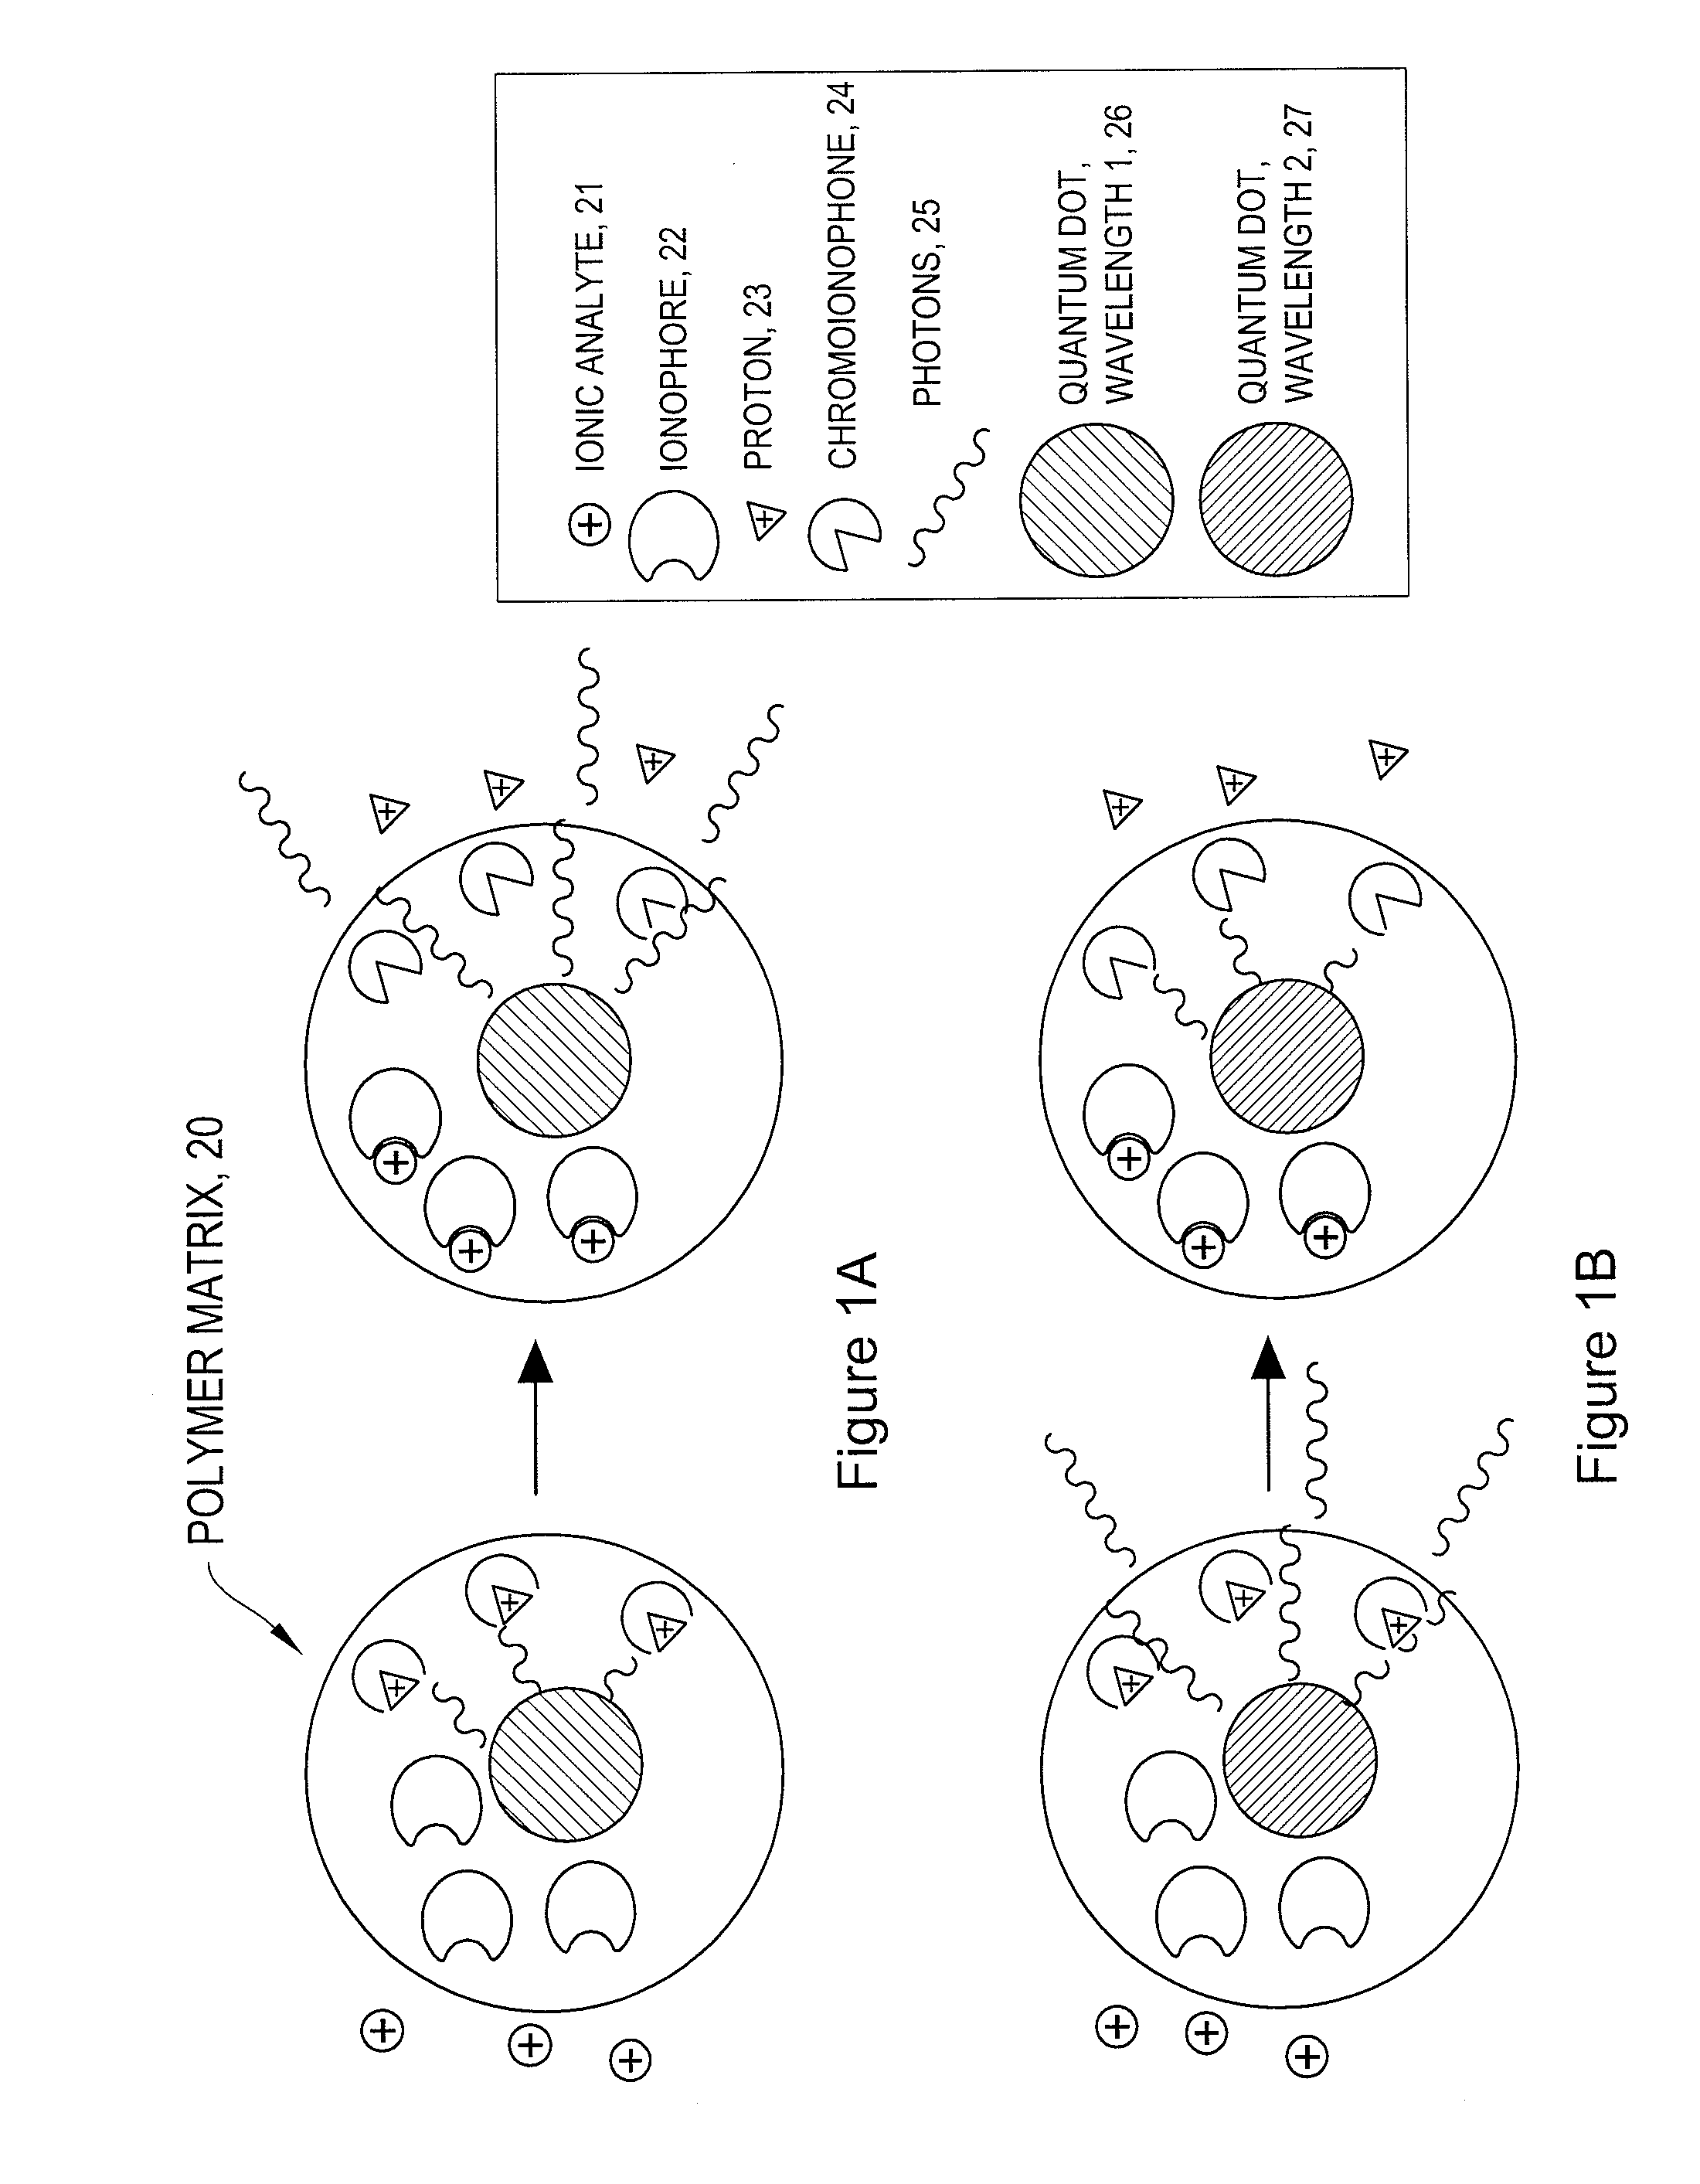 Intracellular nanosensors and methods for their introduction into cells